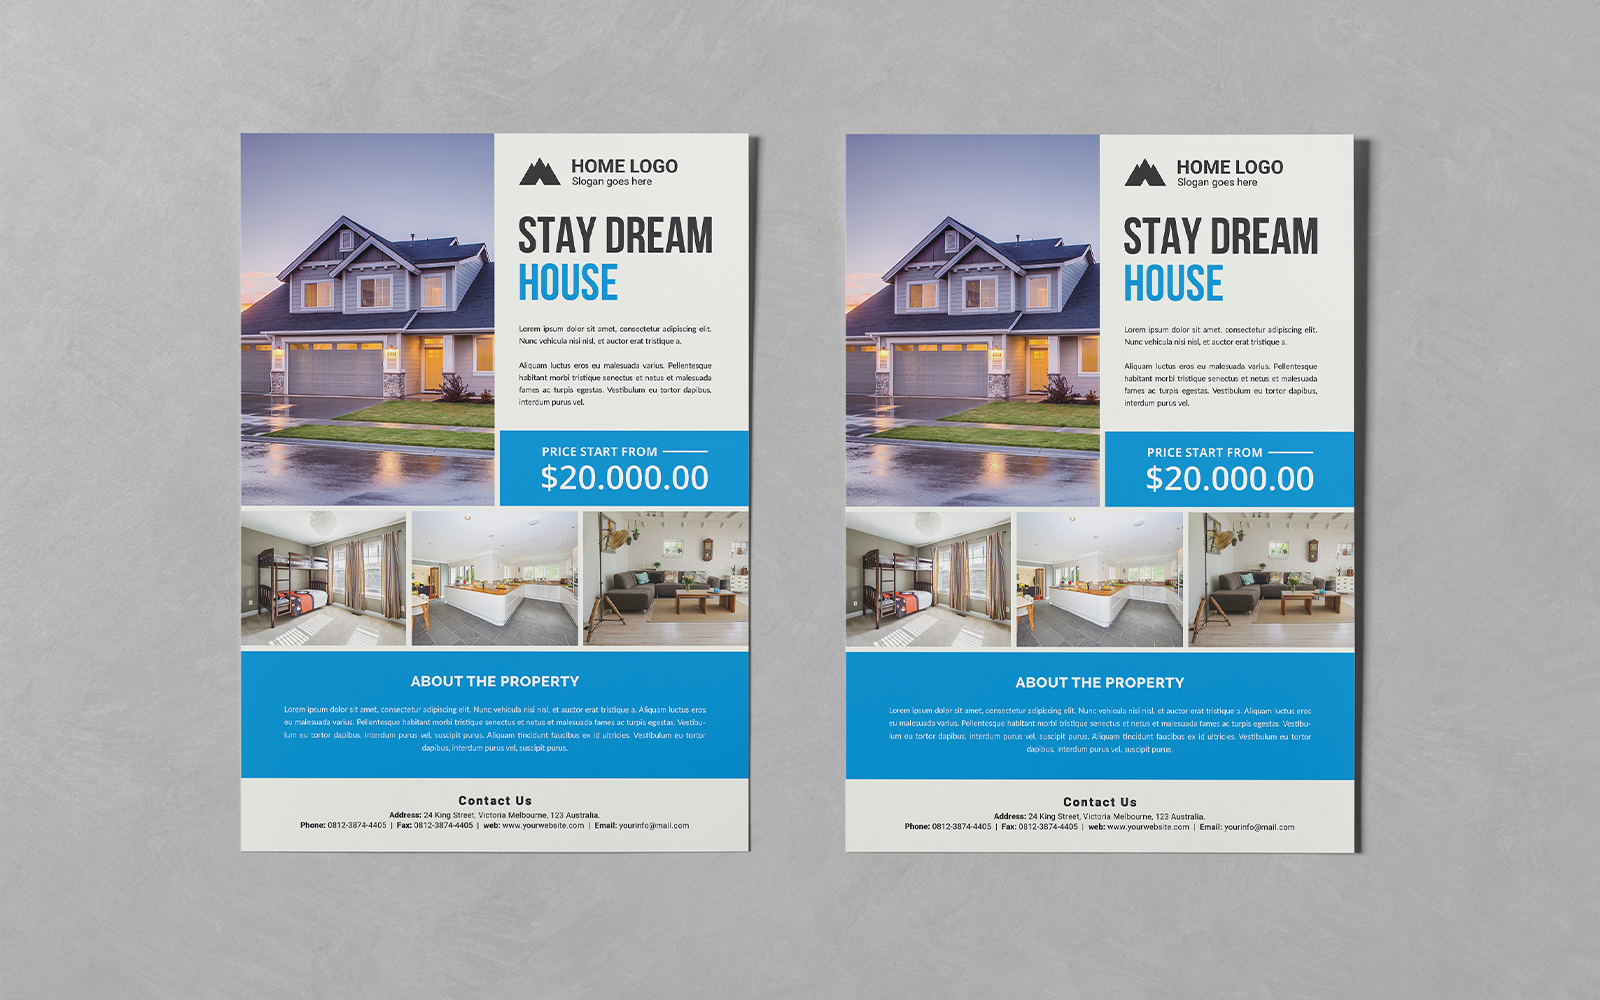 Real Estate Flyer PSD Templates